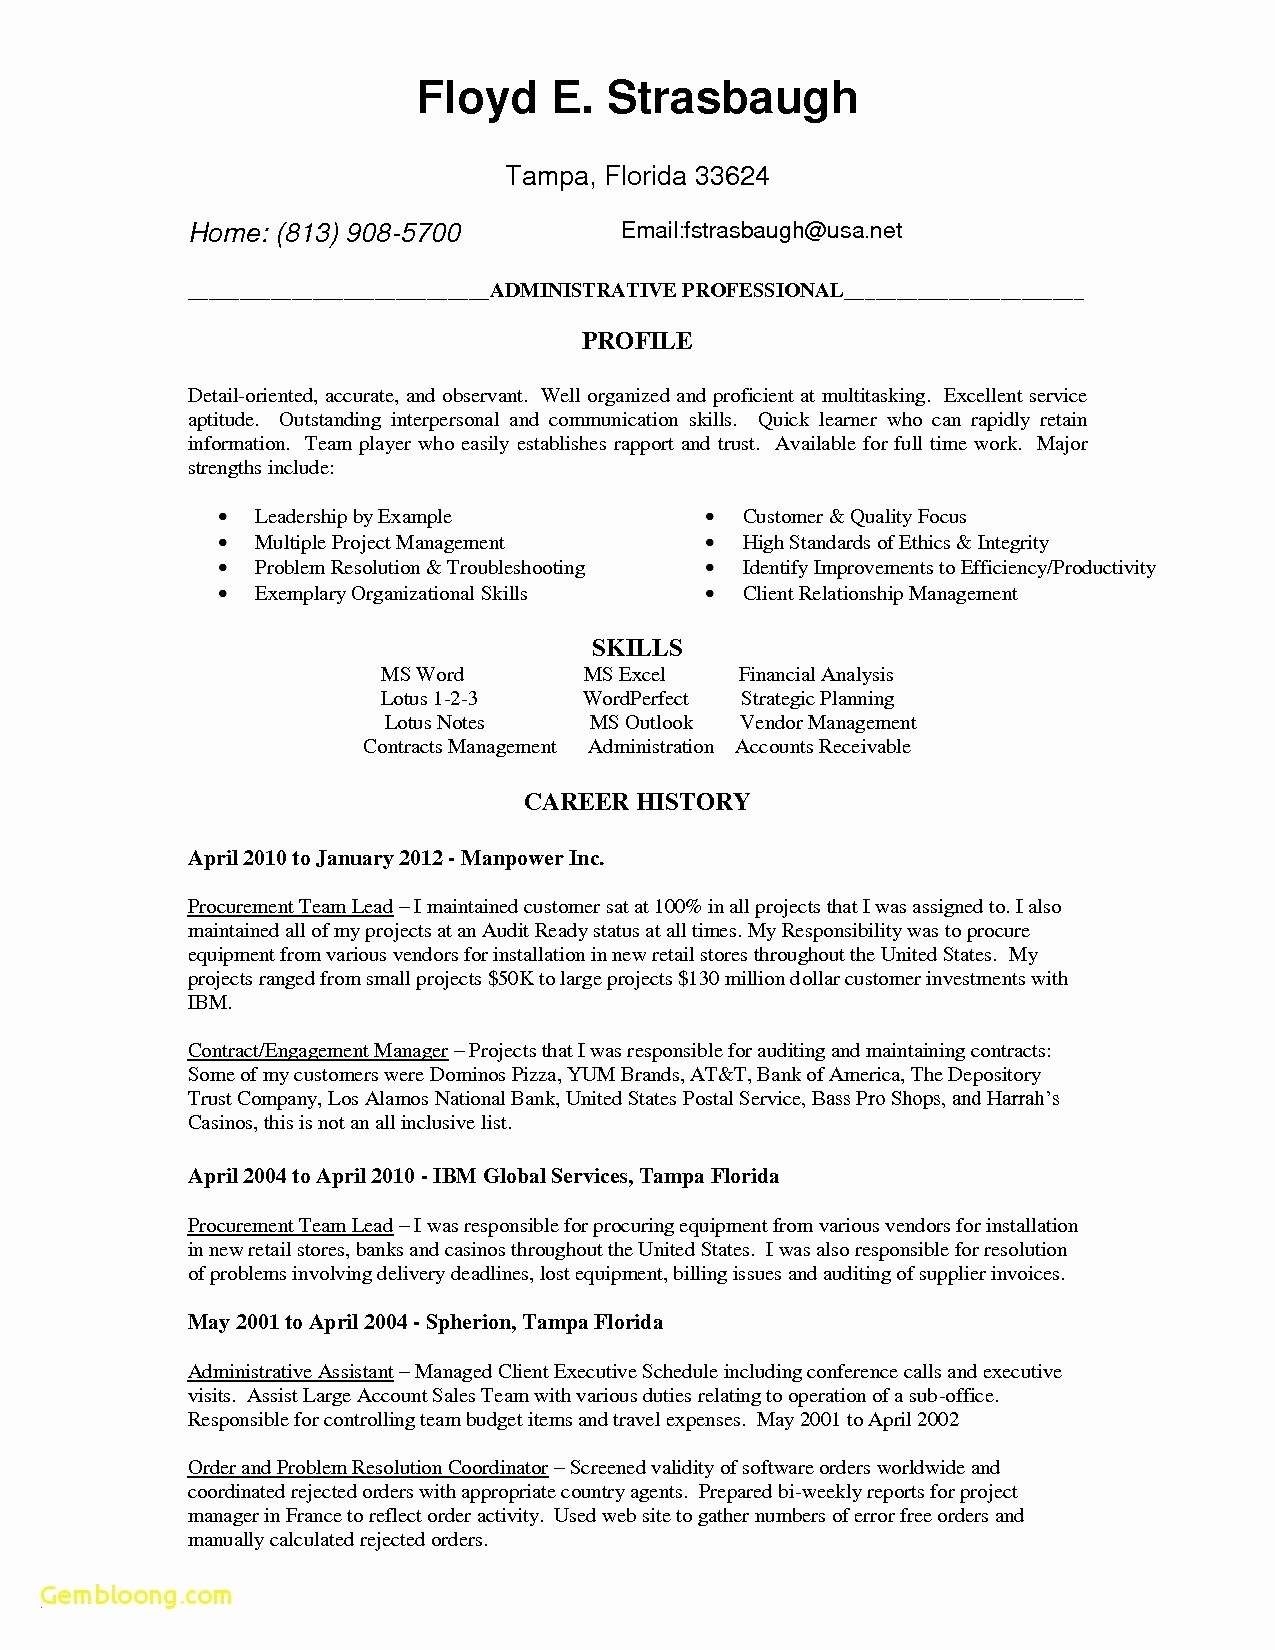 Resume Template Ms Word 2010 Luxury Reference Free Resume Templates Microsoft Word 2010